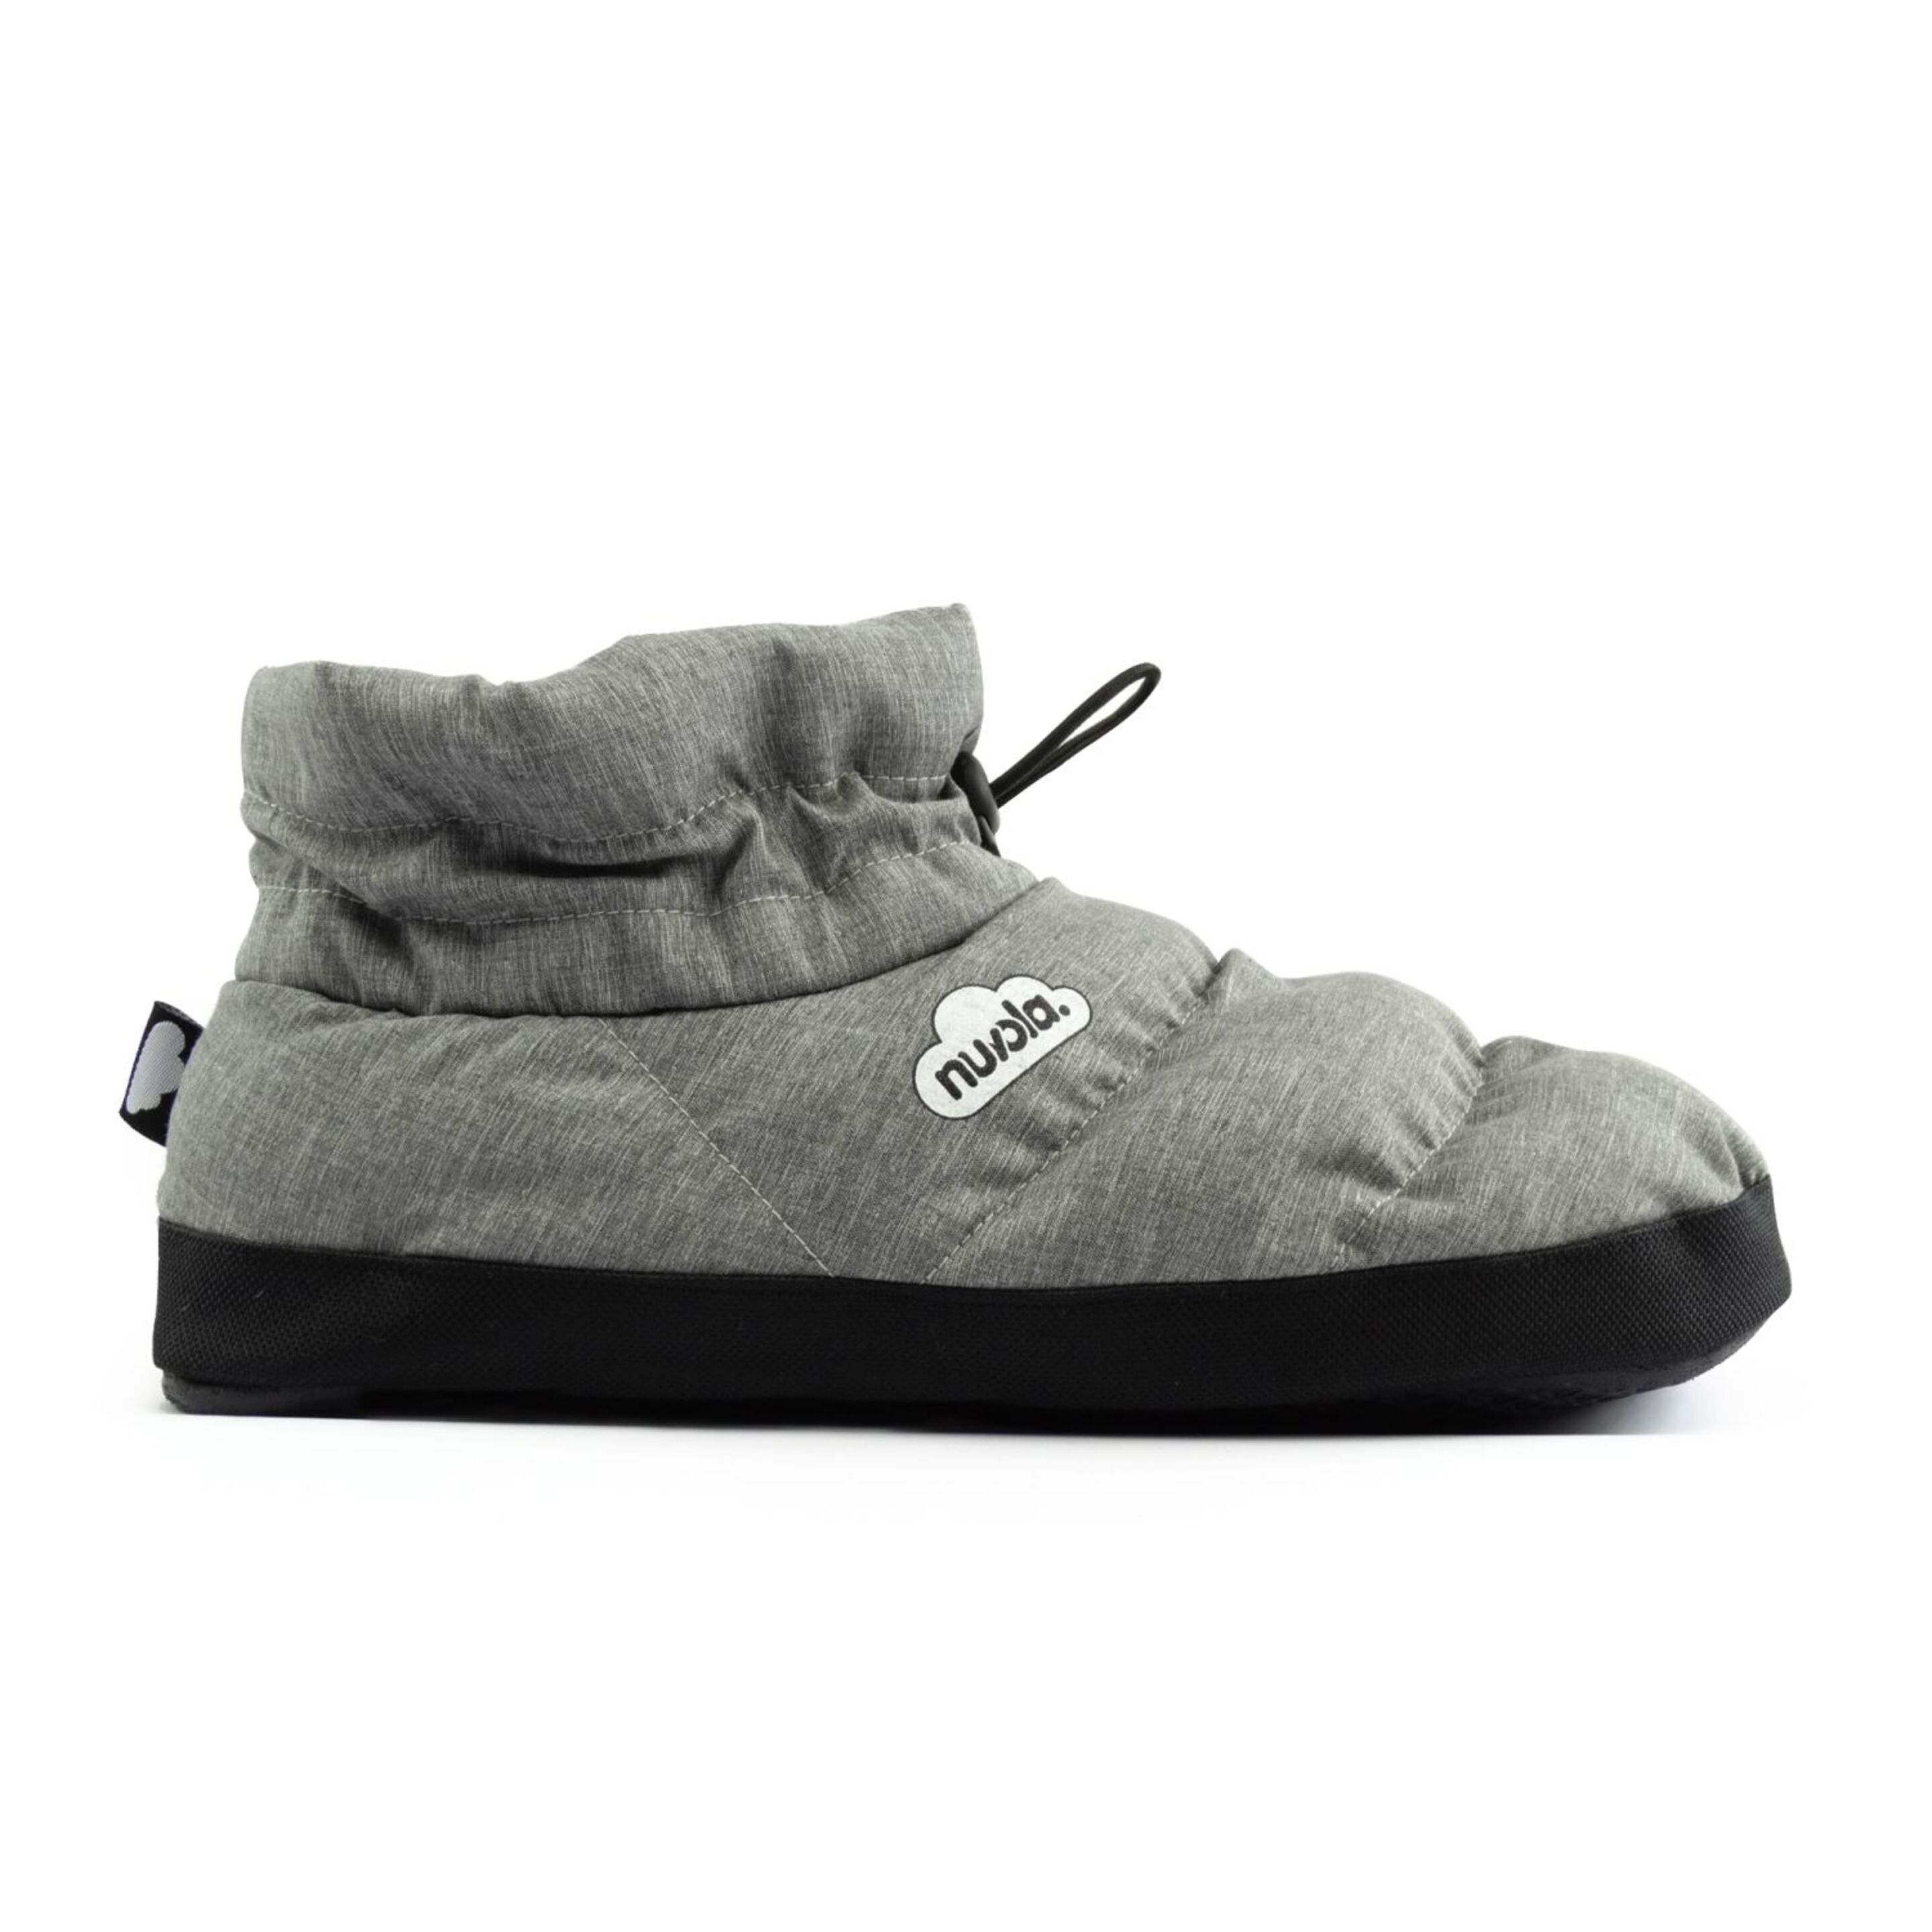 Slippers Camping NuvolaÂ®,boot Home Marbled Suela De Goma